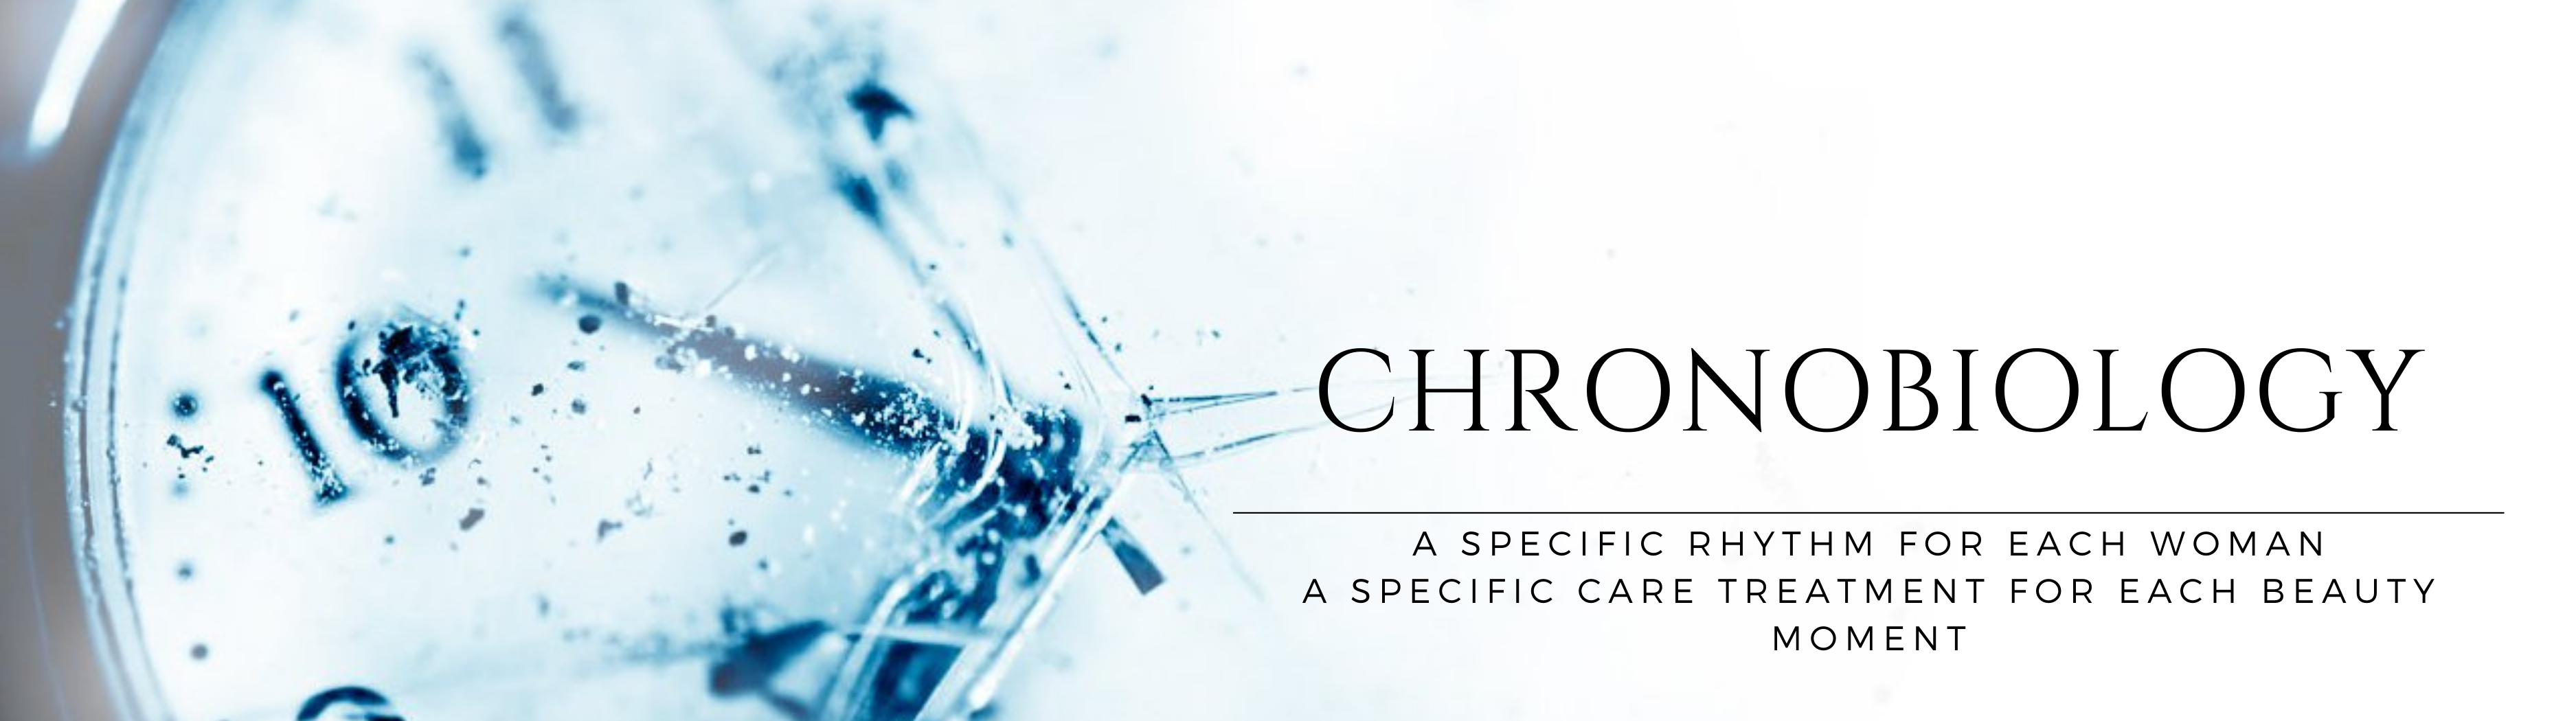 Chronobiology at the heart of Klytia Paris products